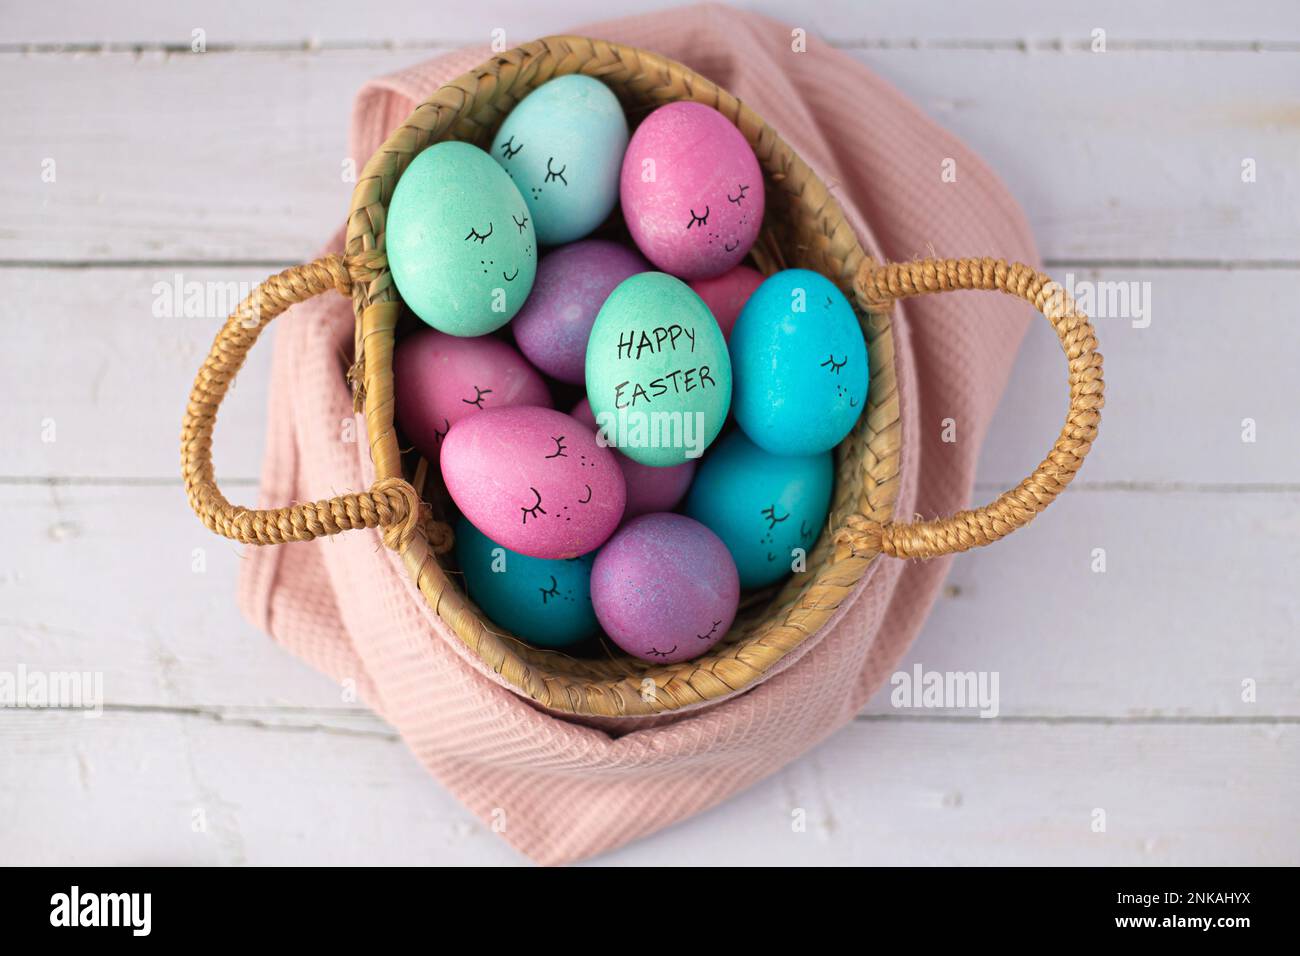 Happy Easter colourful eggs Stock Photo